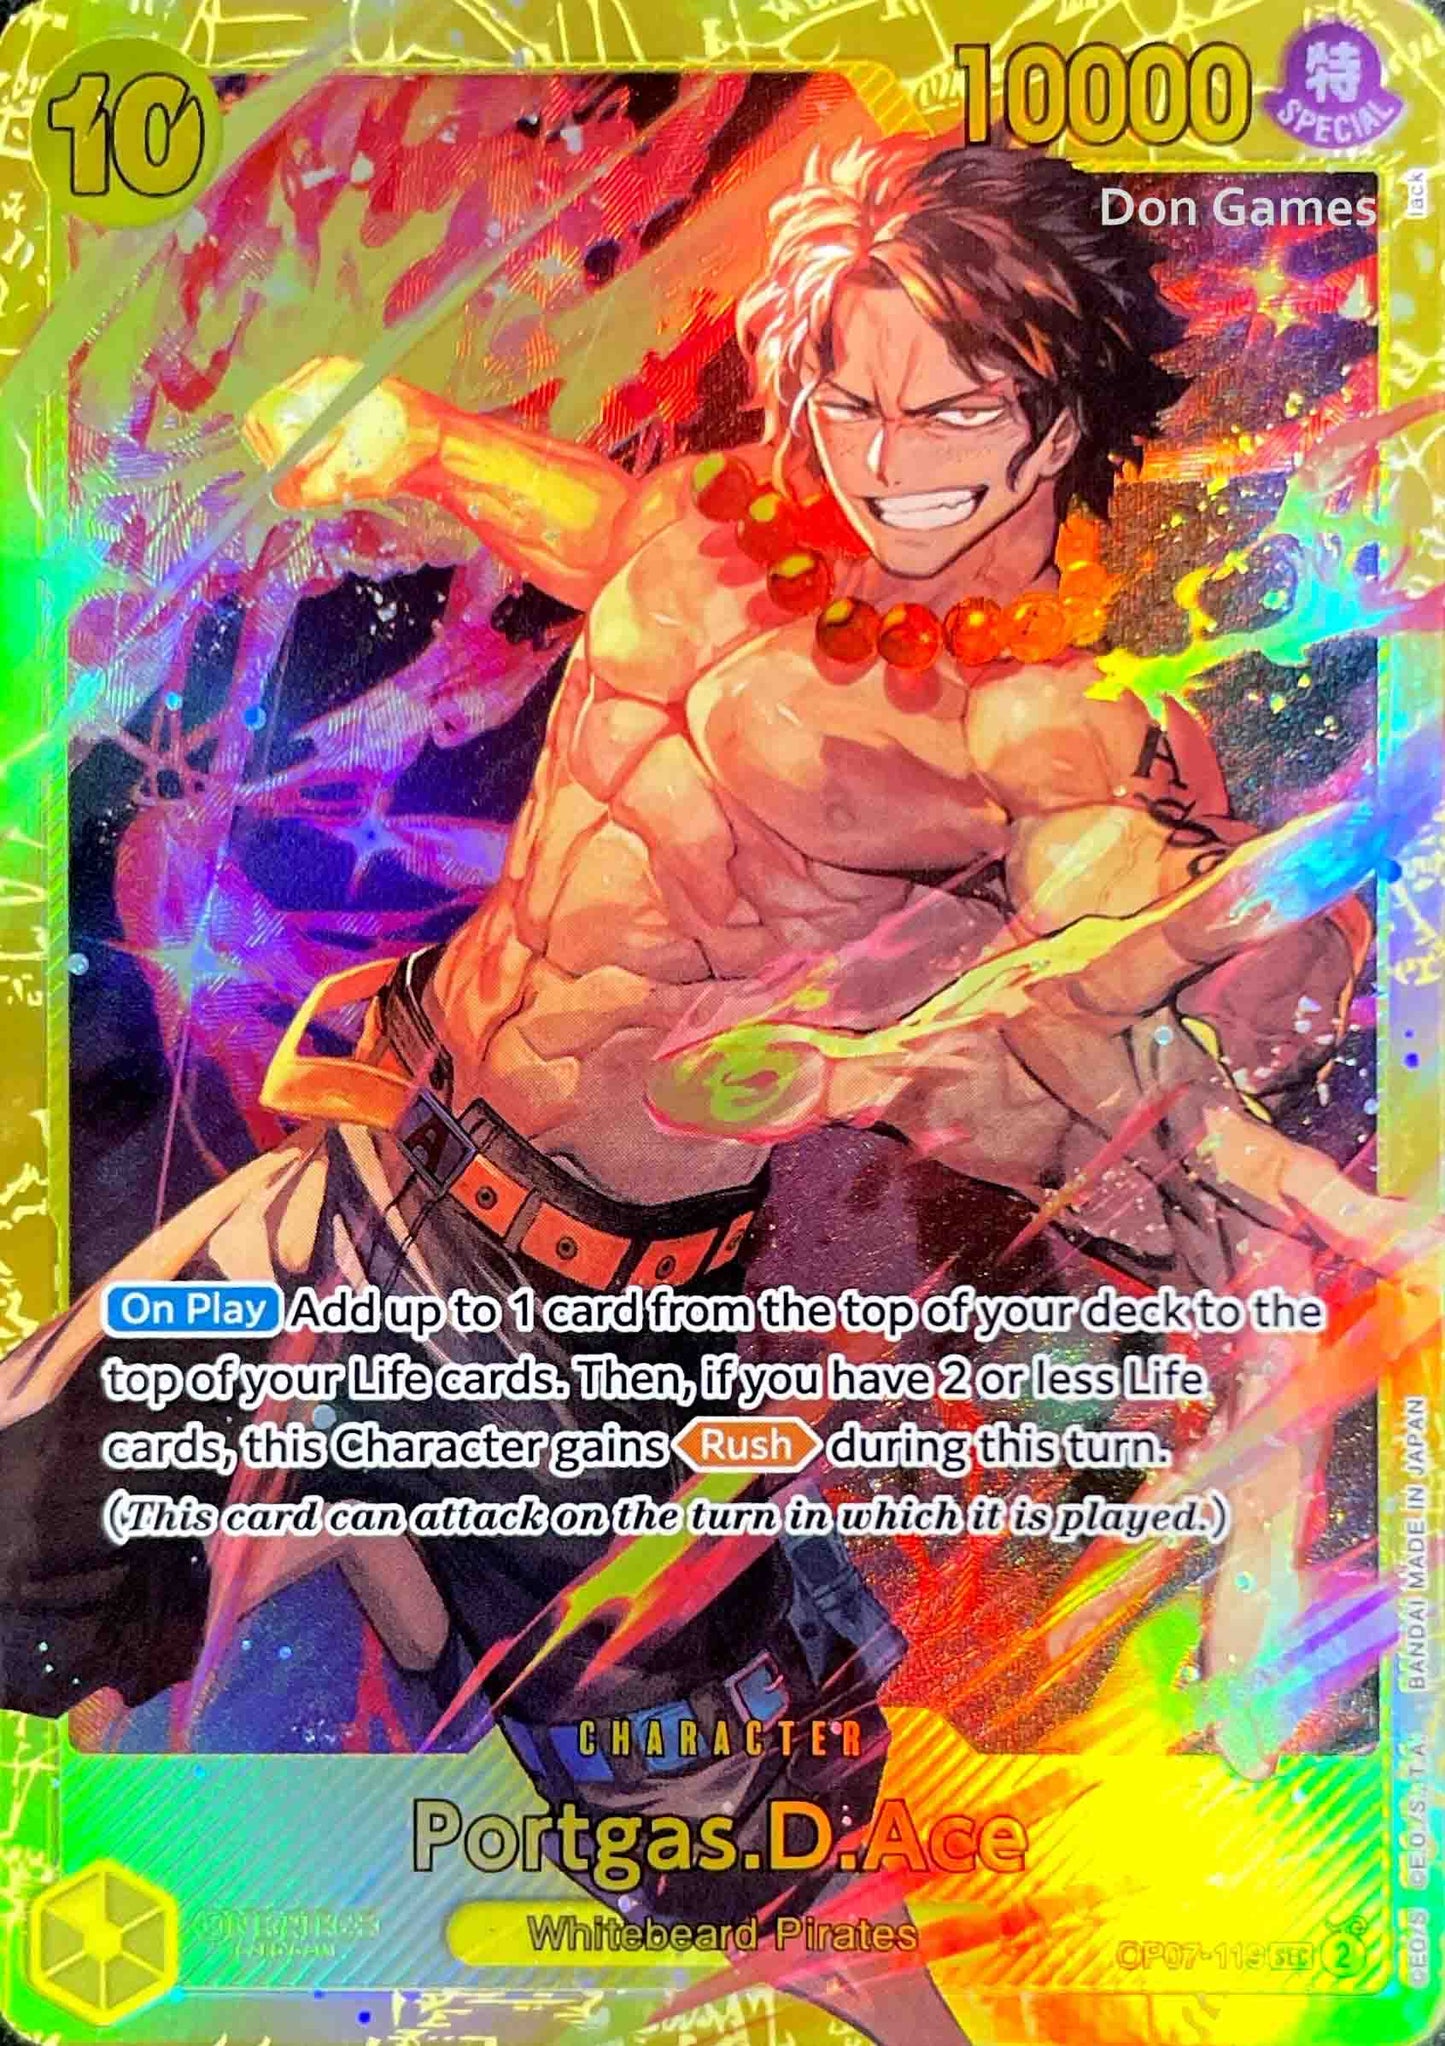 OP07-119 Portgas.D.Ace Character Card